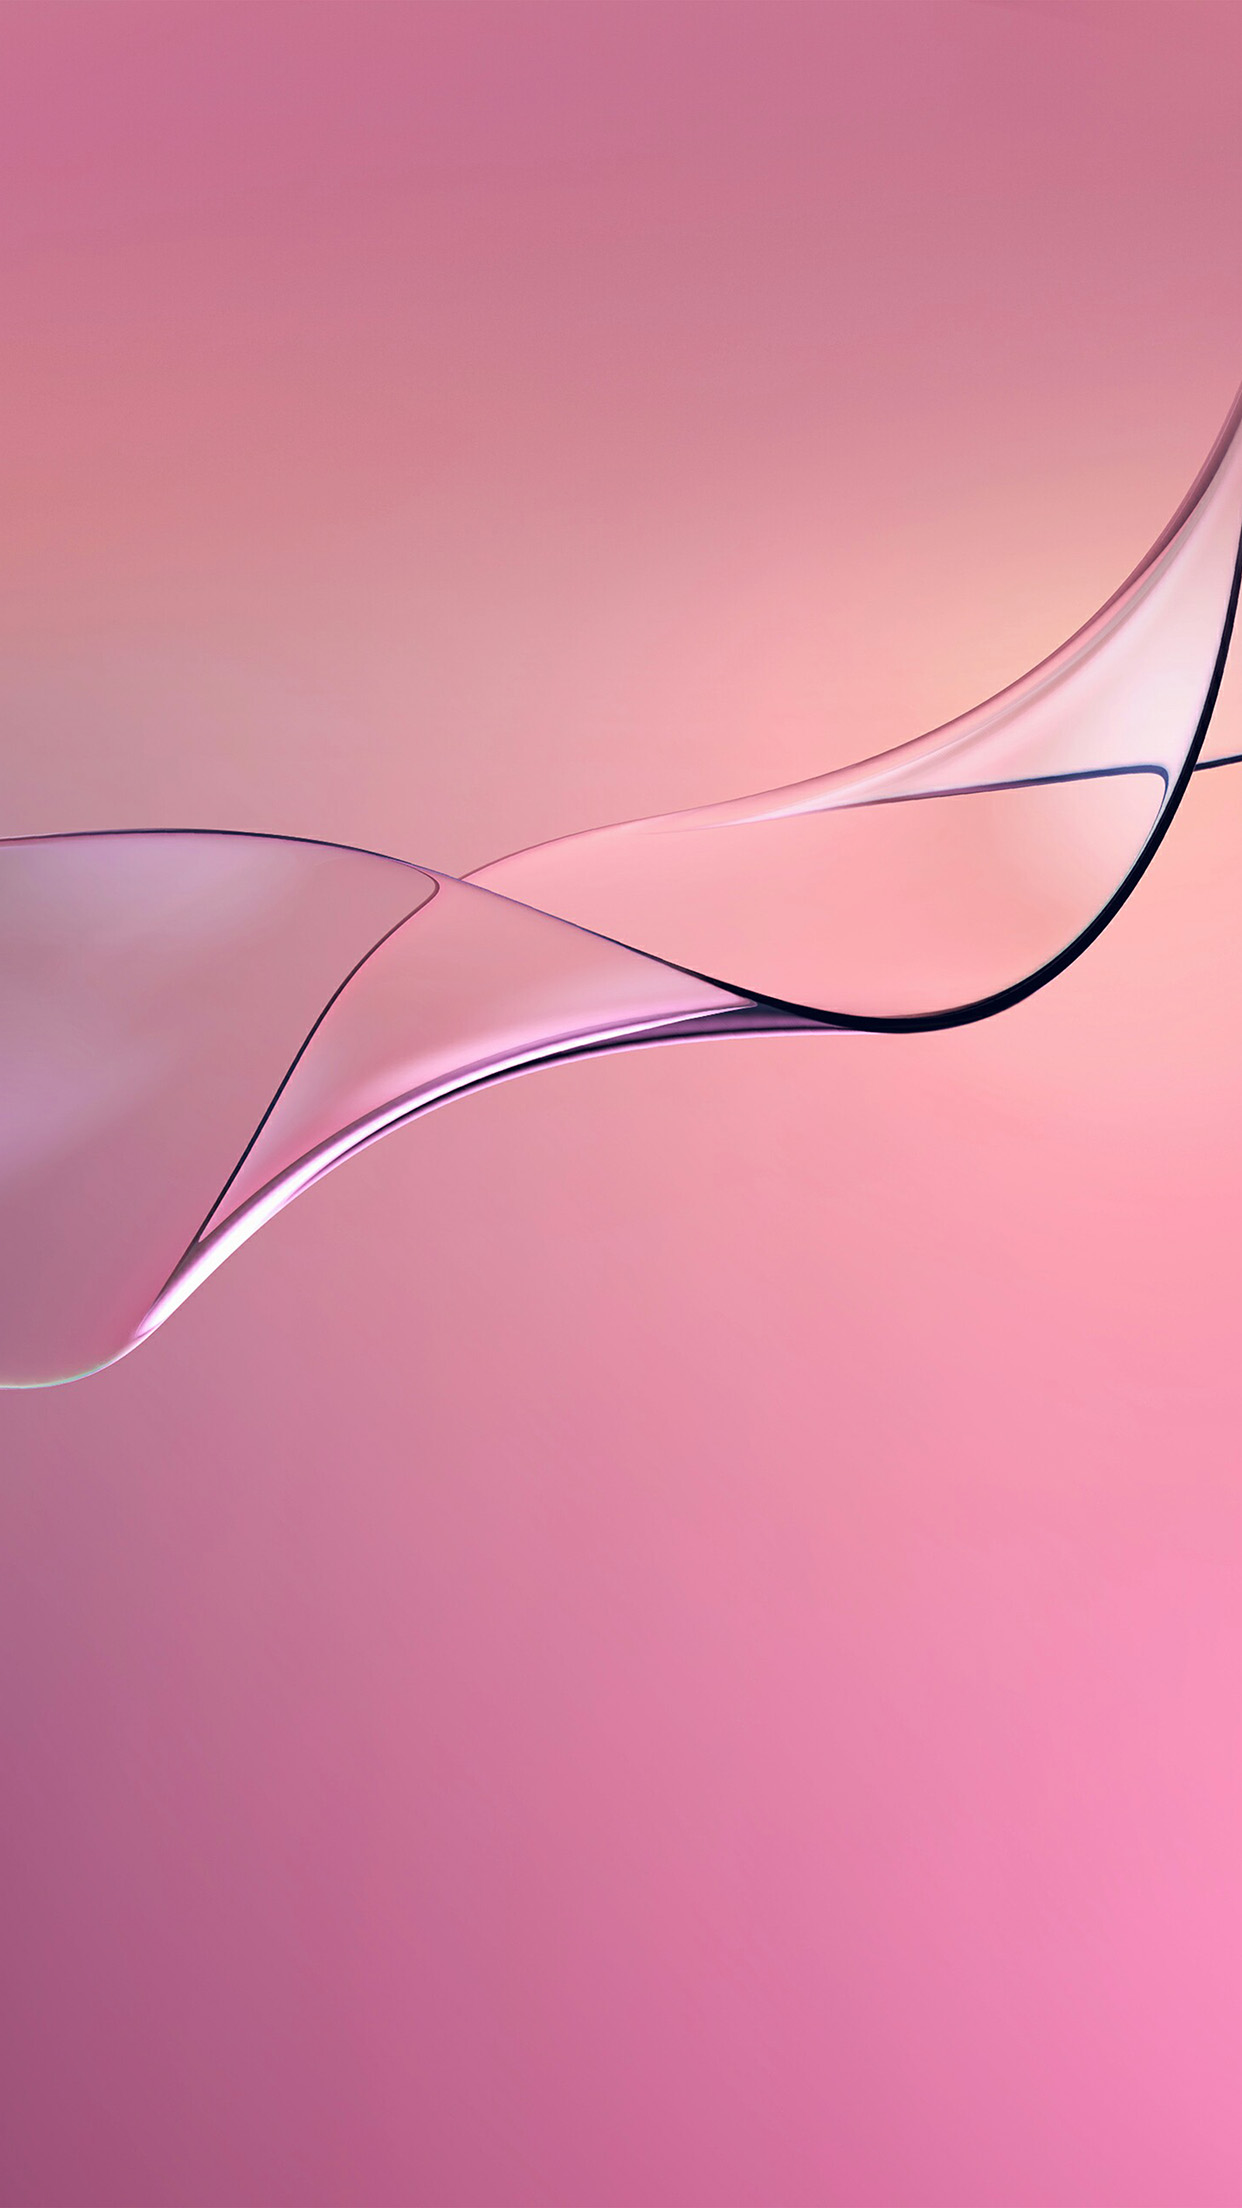 iPhone 6 wallpaper. curves pink abstract pattern background